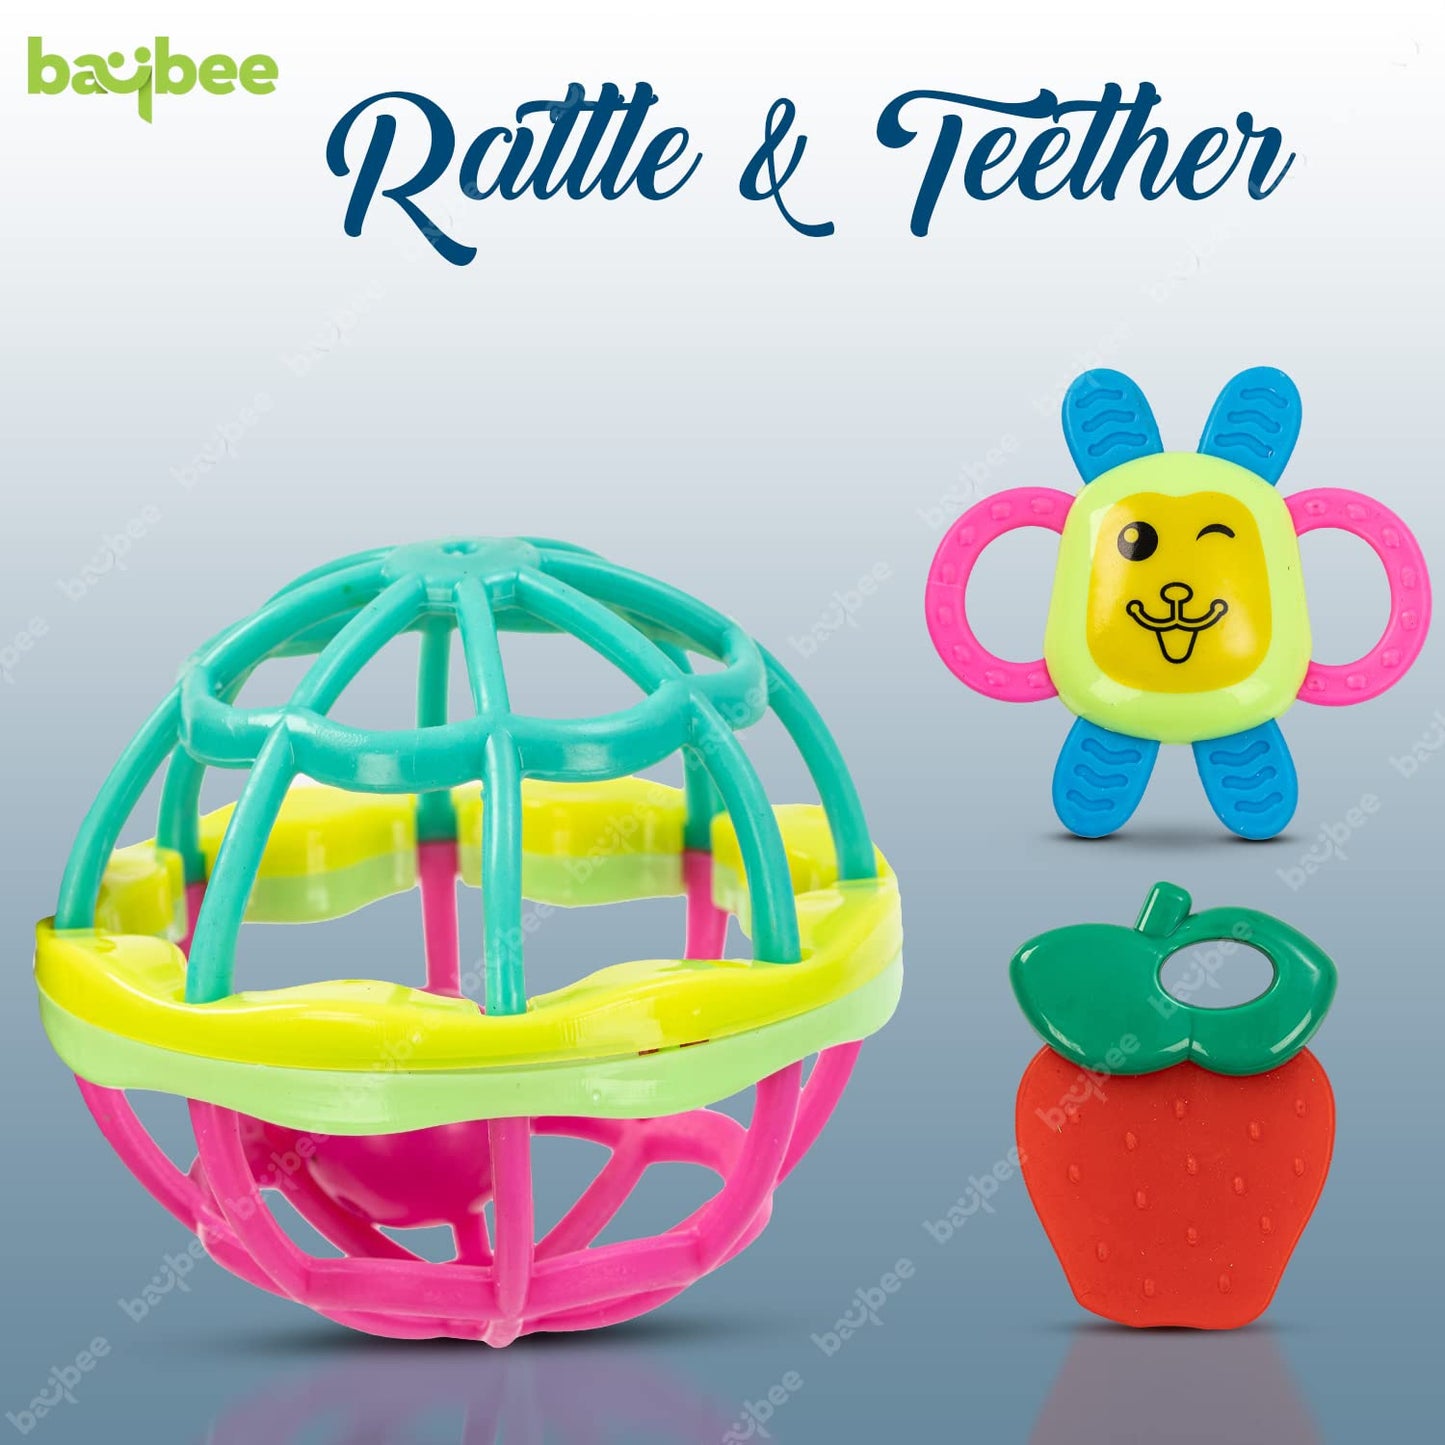 Baybee Pack of 3 Rattles Set for Babies 0-6 Months, Non-Toxic 3 Attractive Rattle Set, Newborn Baby Gift Products